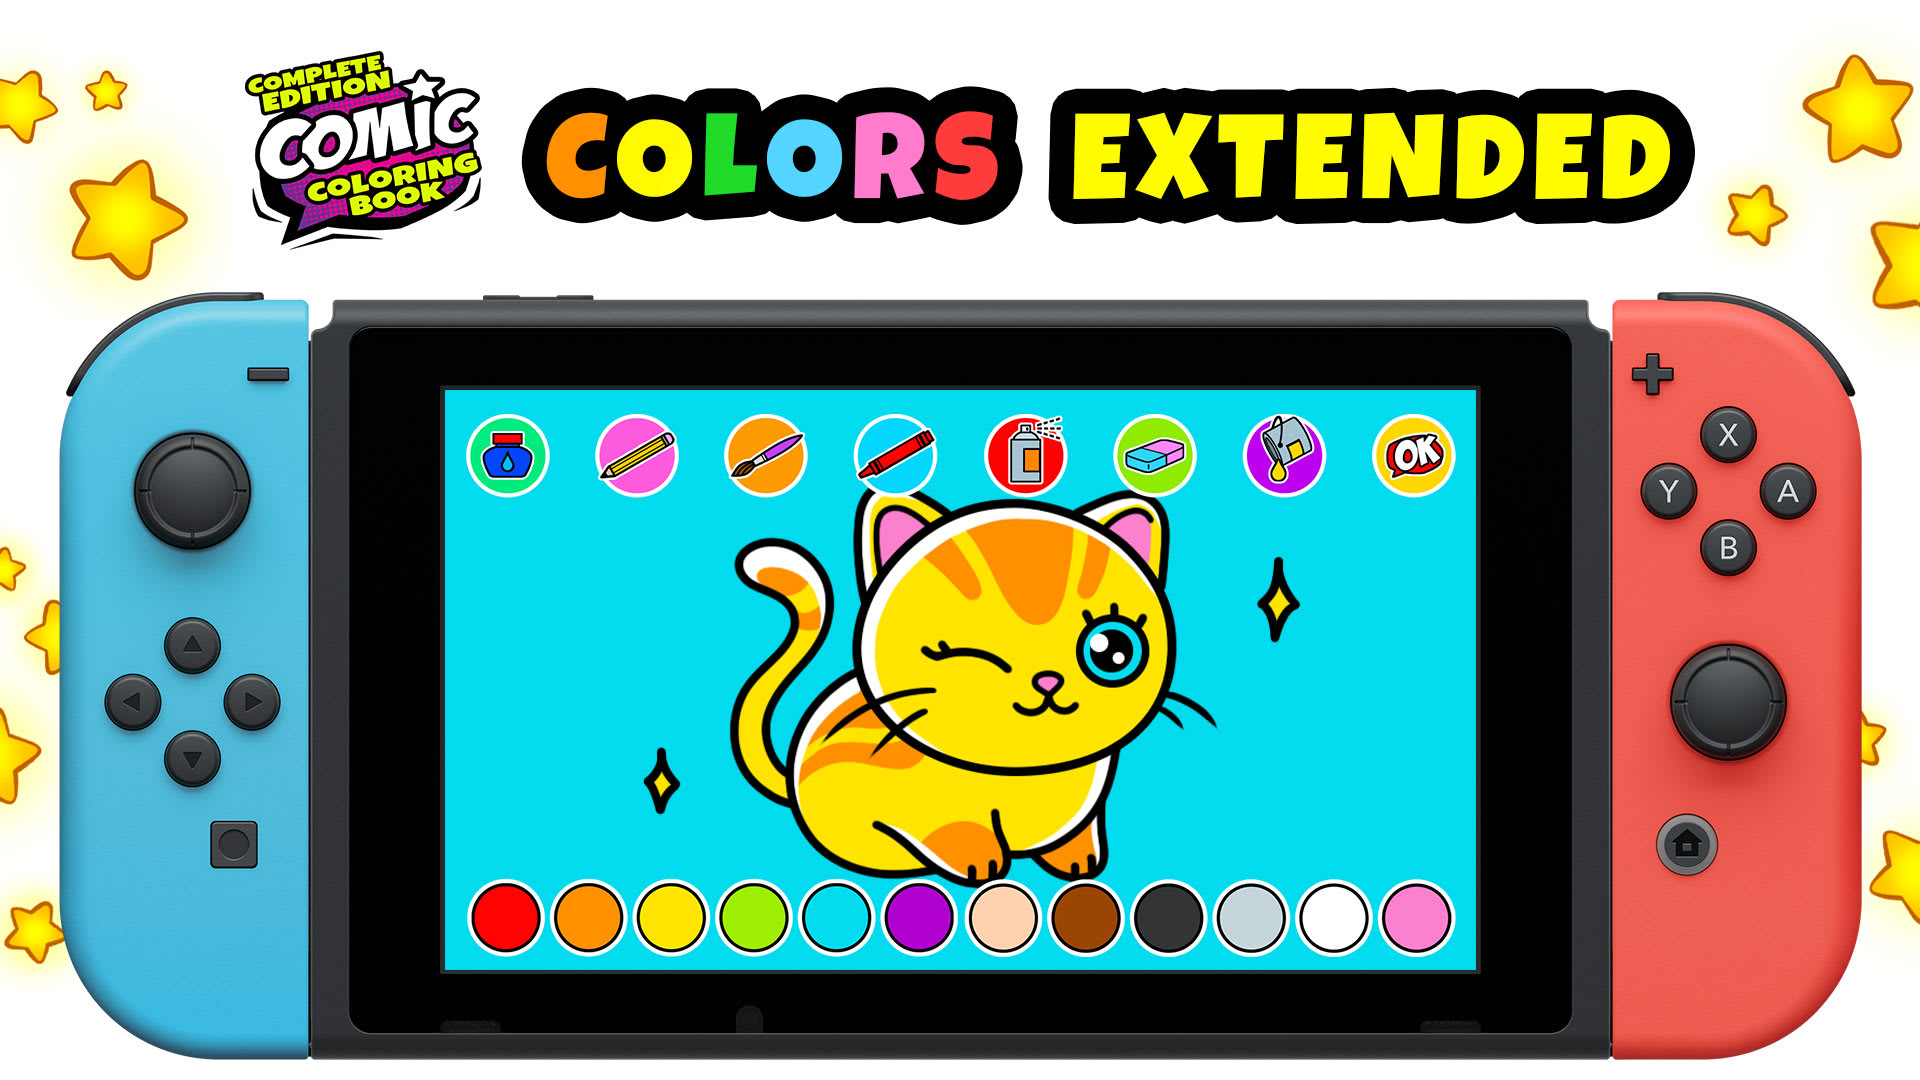 Comic Coloring Book Complete Edition: COLORS Extended 1